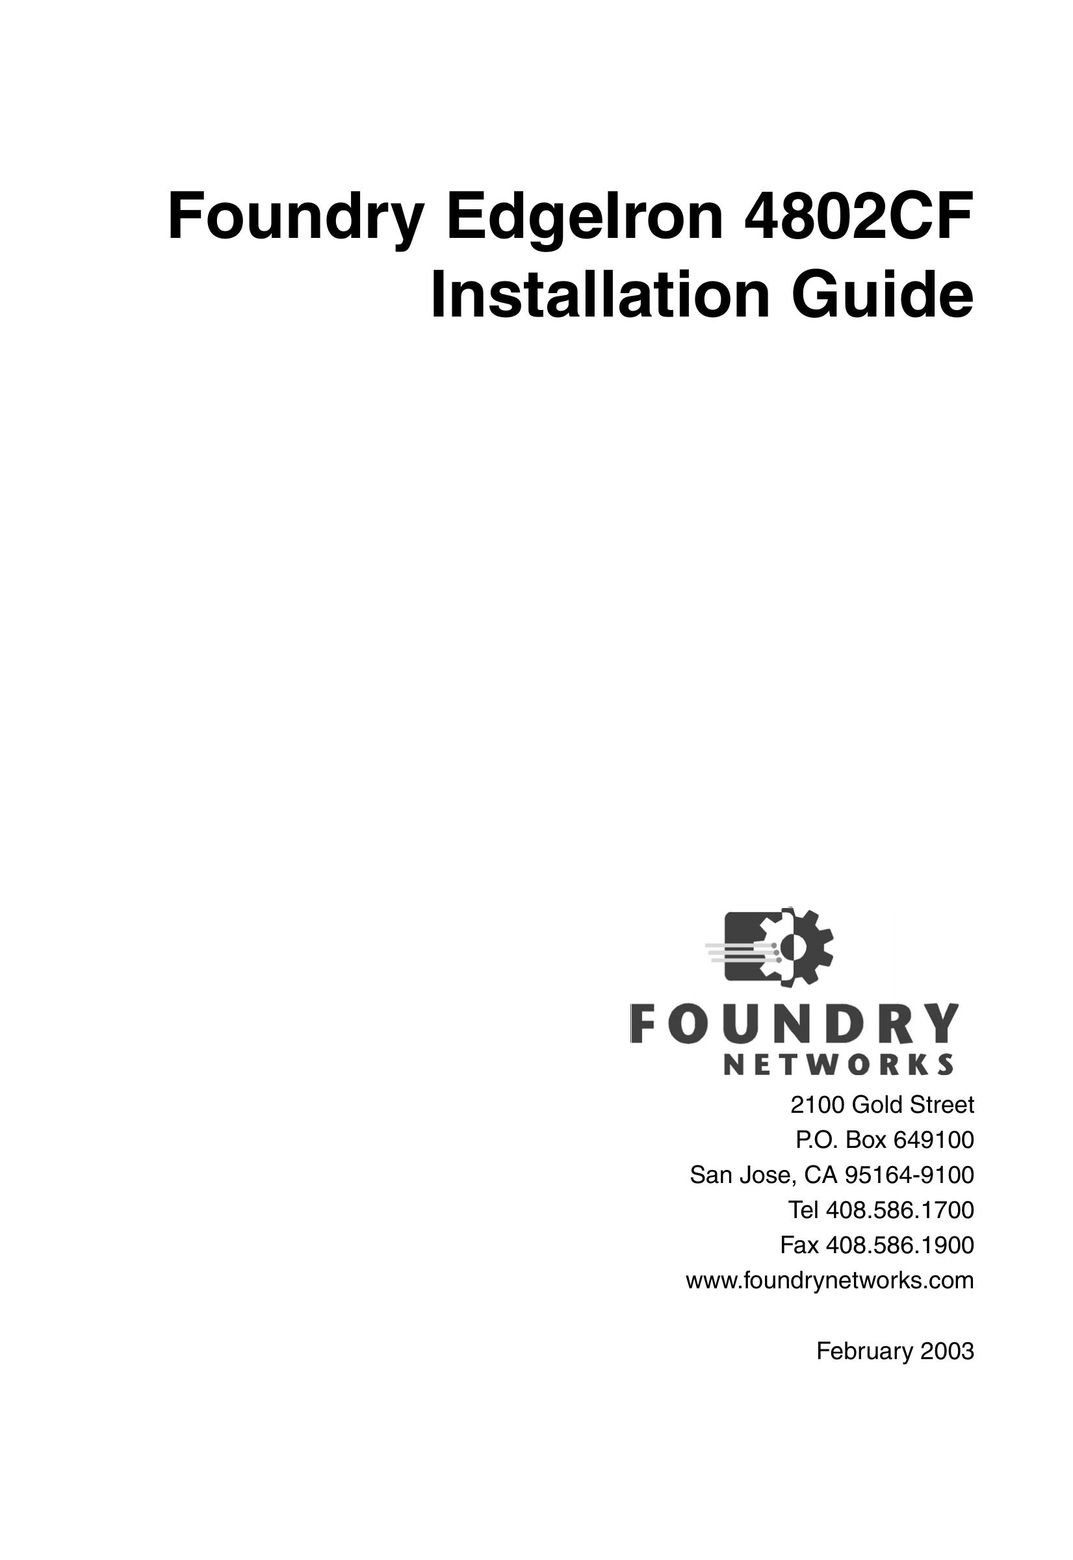 Foundry Networks OSI Network Card User Manual